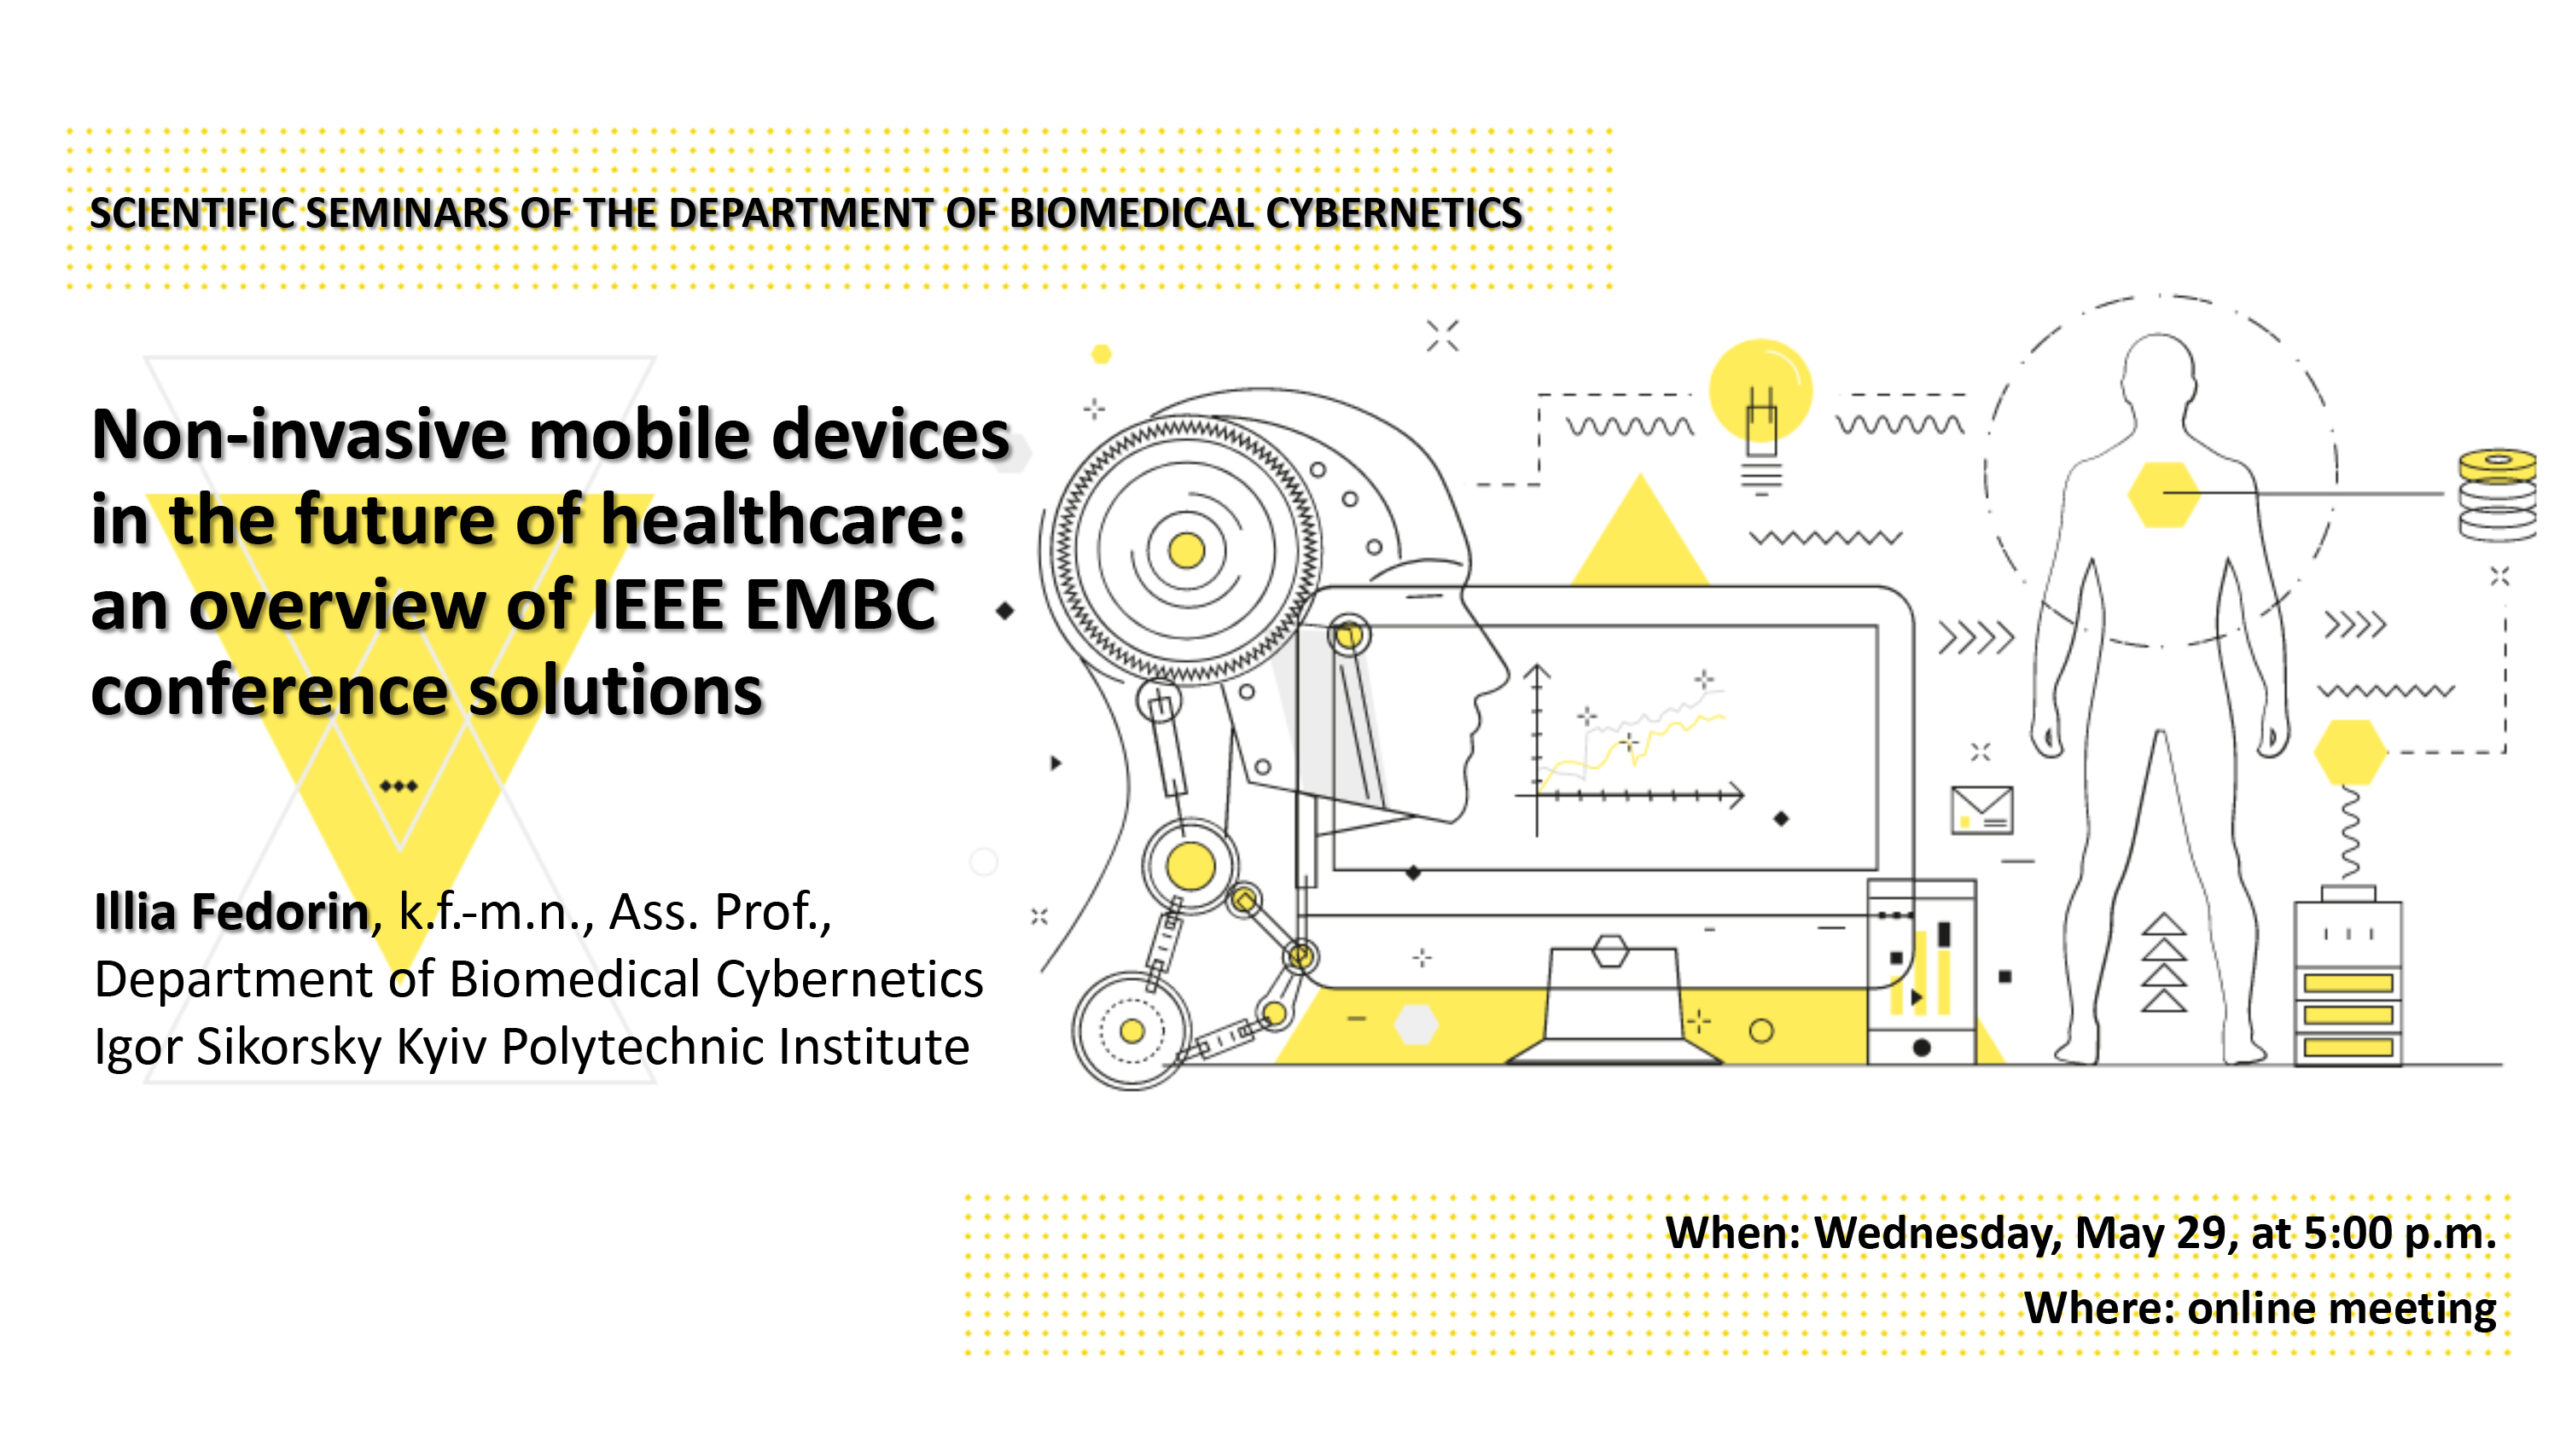 Non-invasive mobile devices in the future of healthcare: an overview of IEEE EMBC conference solutions